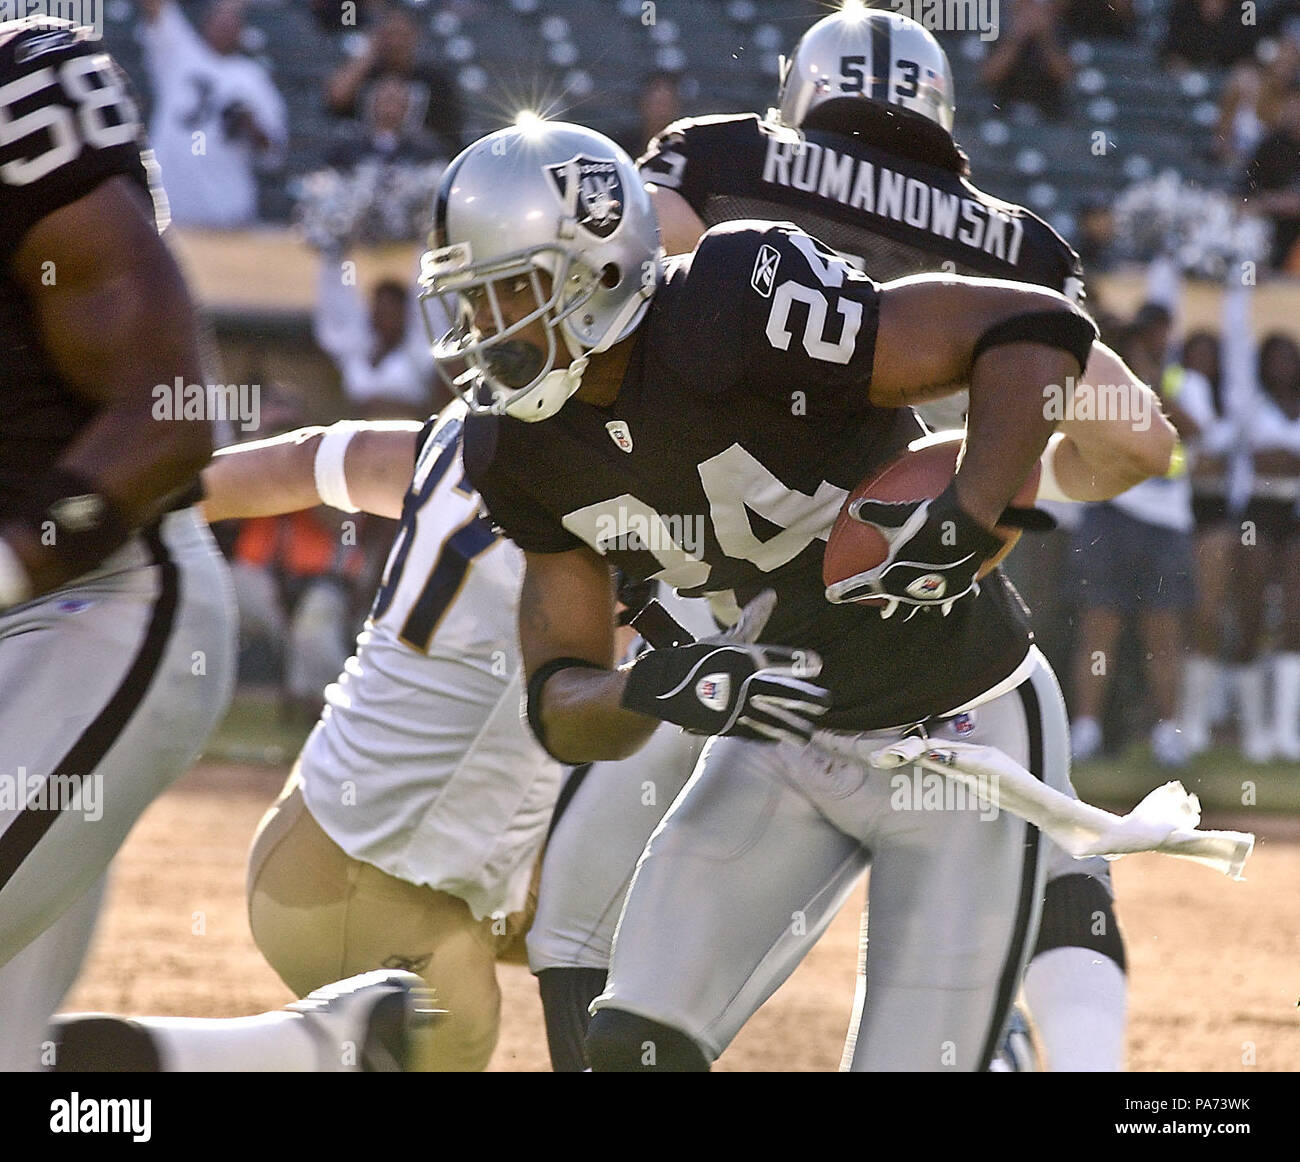 Oakland, California, USA. 8th Aug, 2003. Oakland Raiders defensive back Charles  Woodson (24) holds on to the ball. The Raiders defeated the Rams 7-6 in a  preseason game. Credit: Al Golub/ZUMA Wire/Alamy